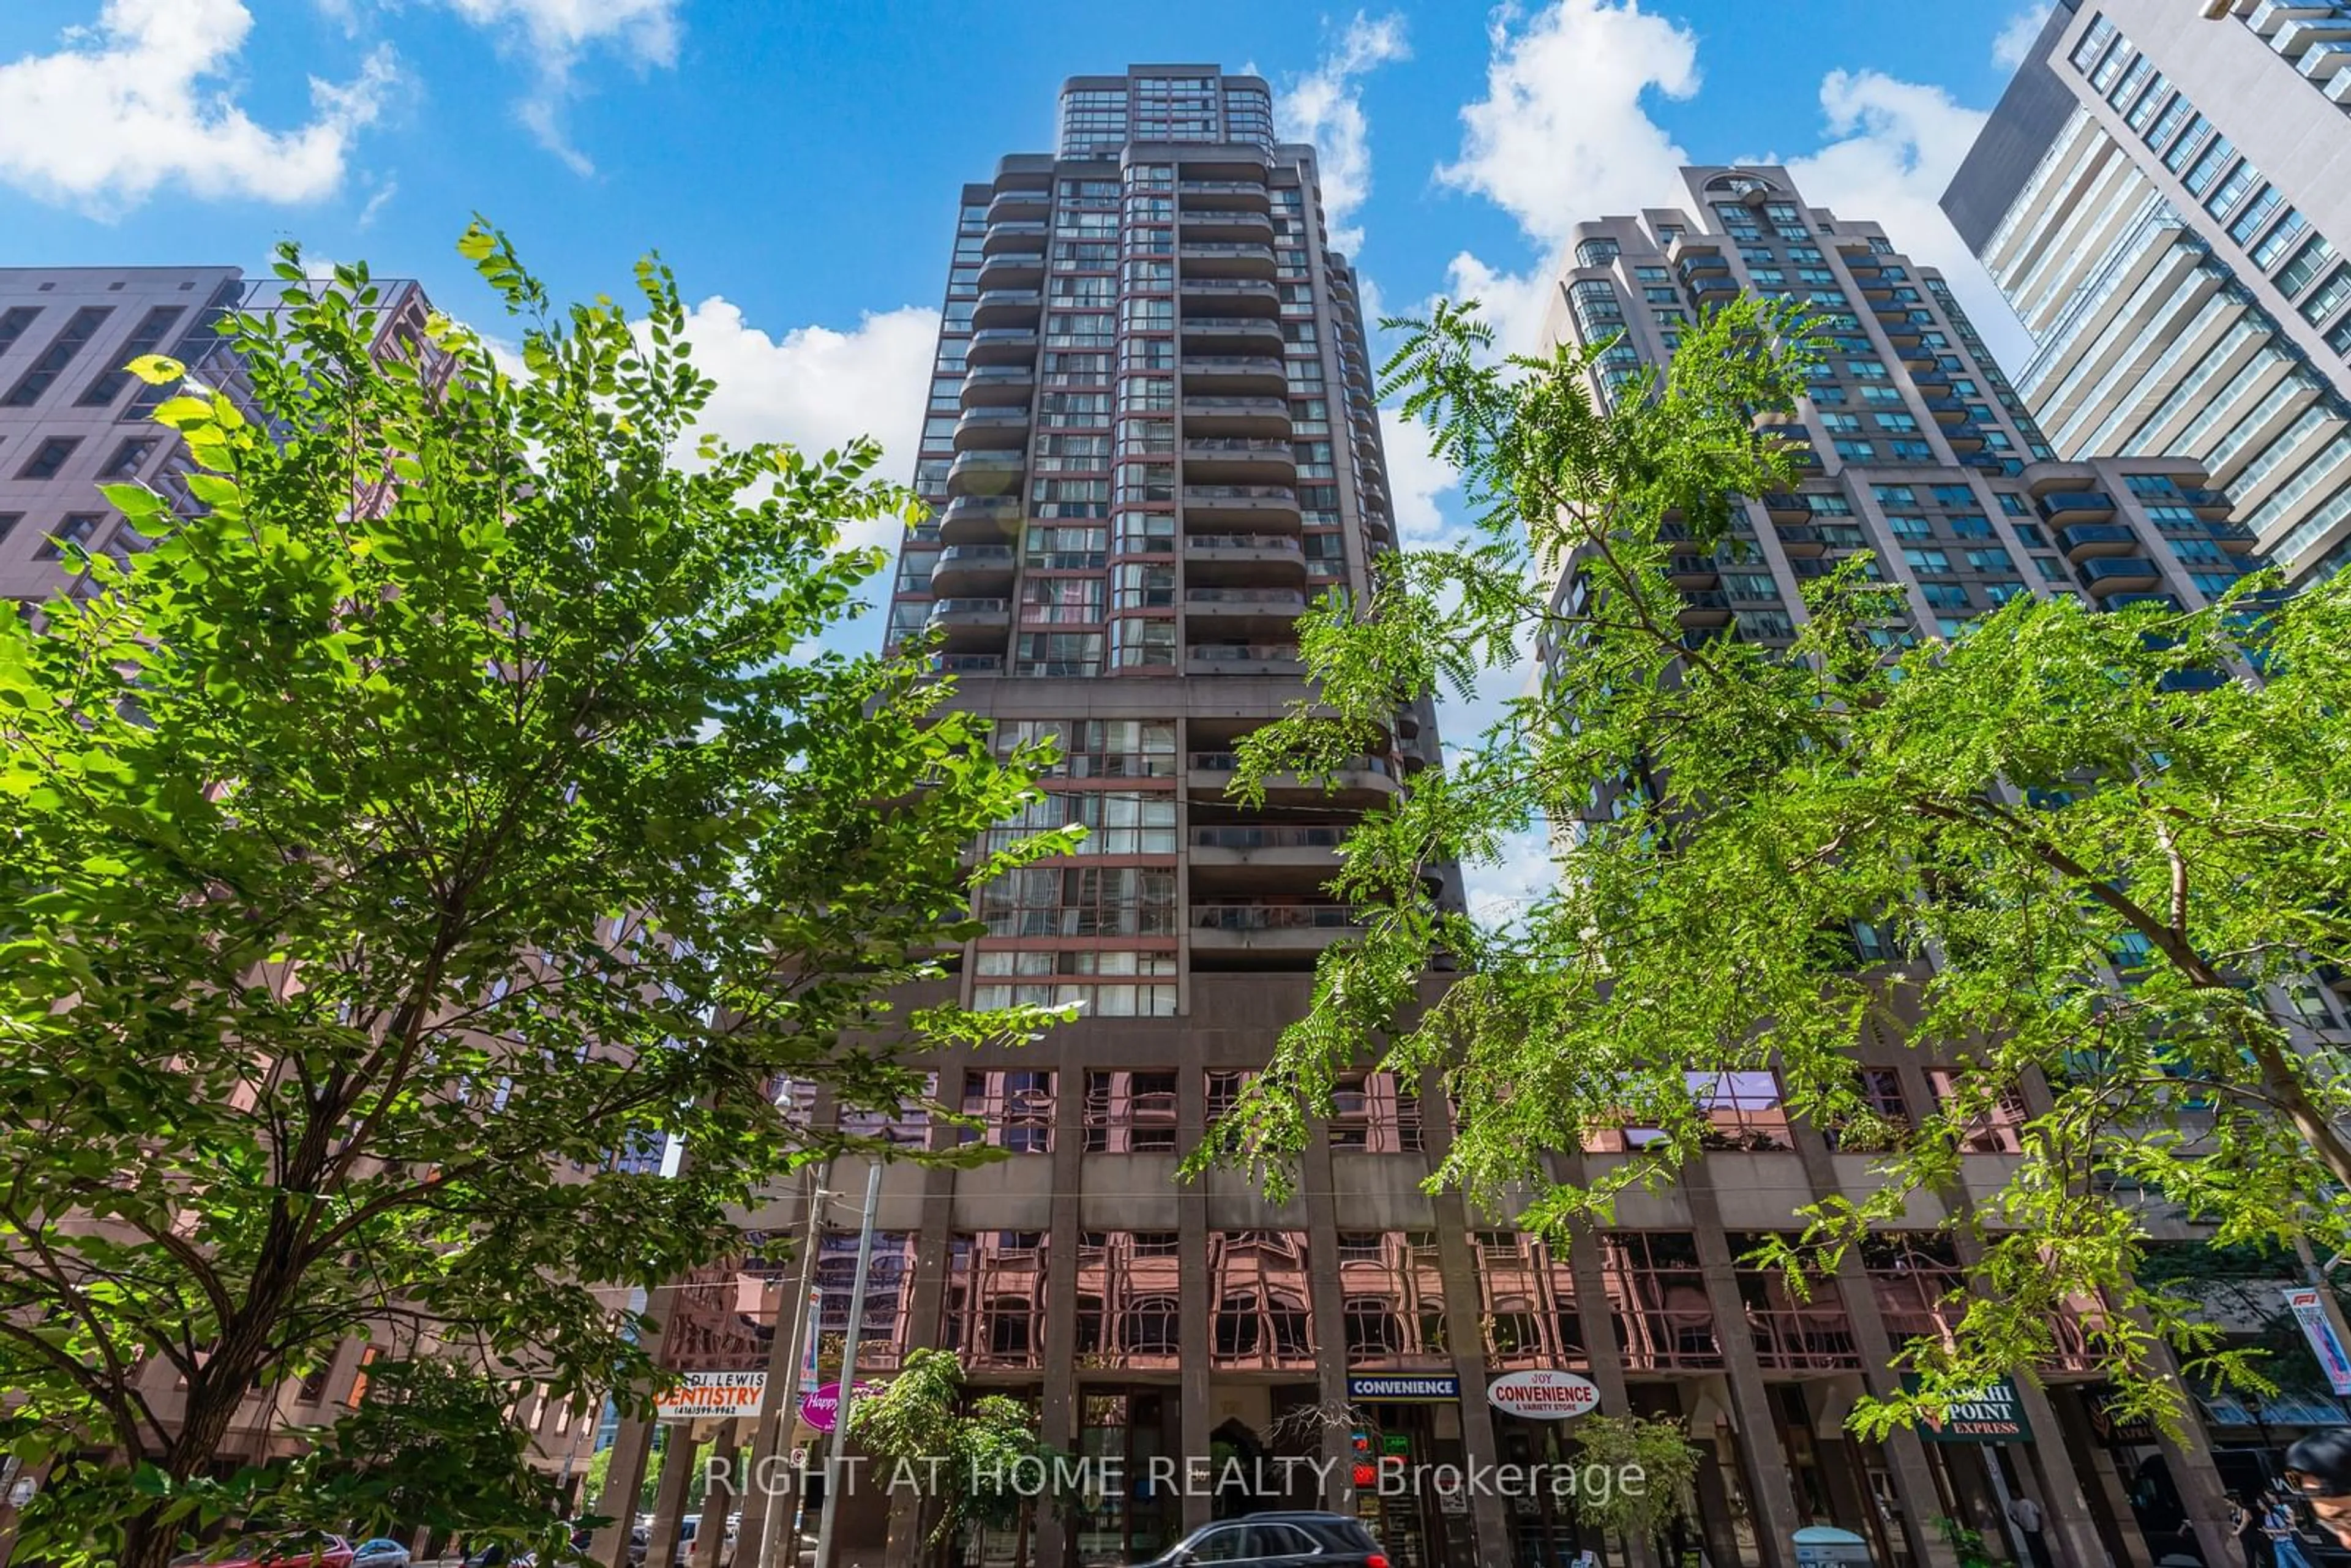 A pic from exterior of the house or condo for 736 Bay St #506, Toronto Ontario M5G 2M4